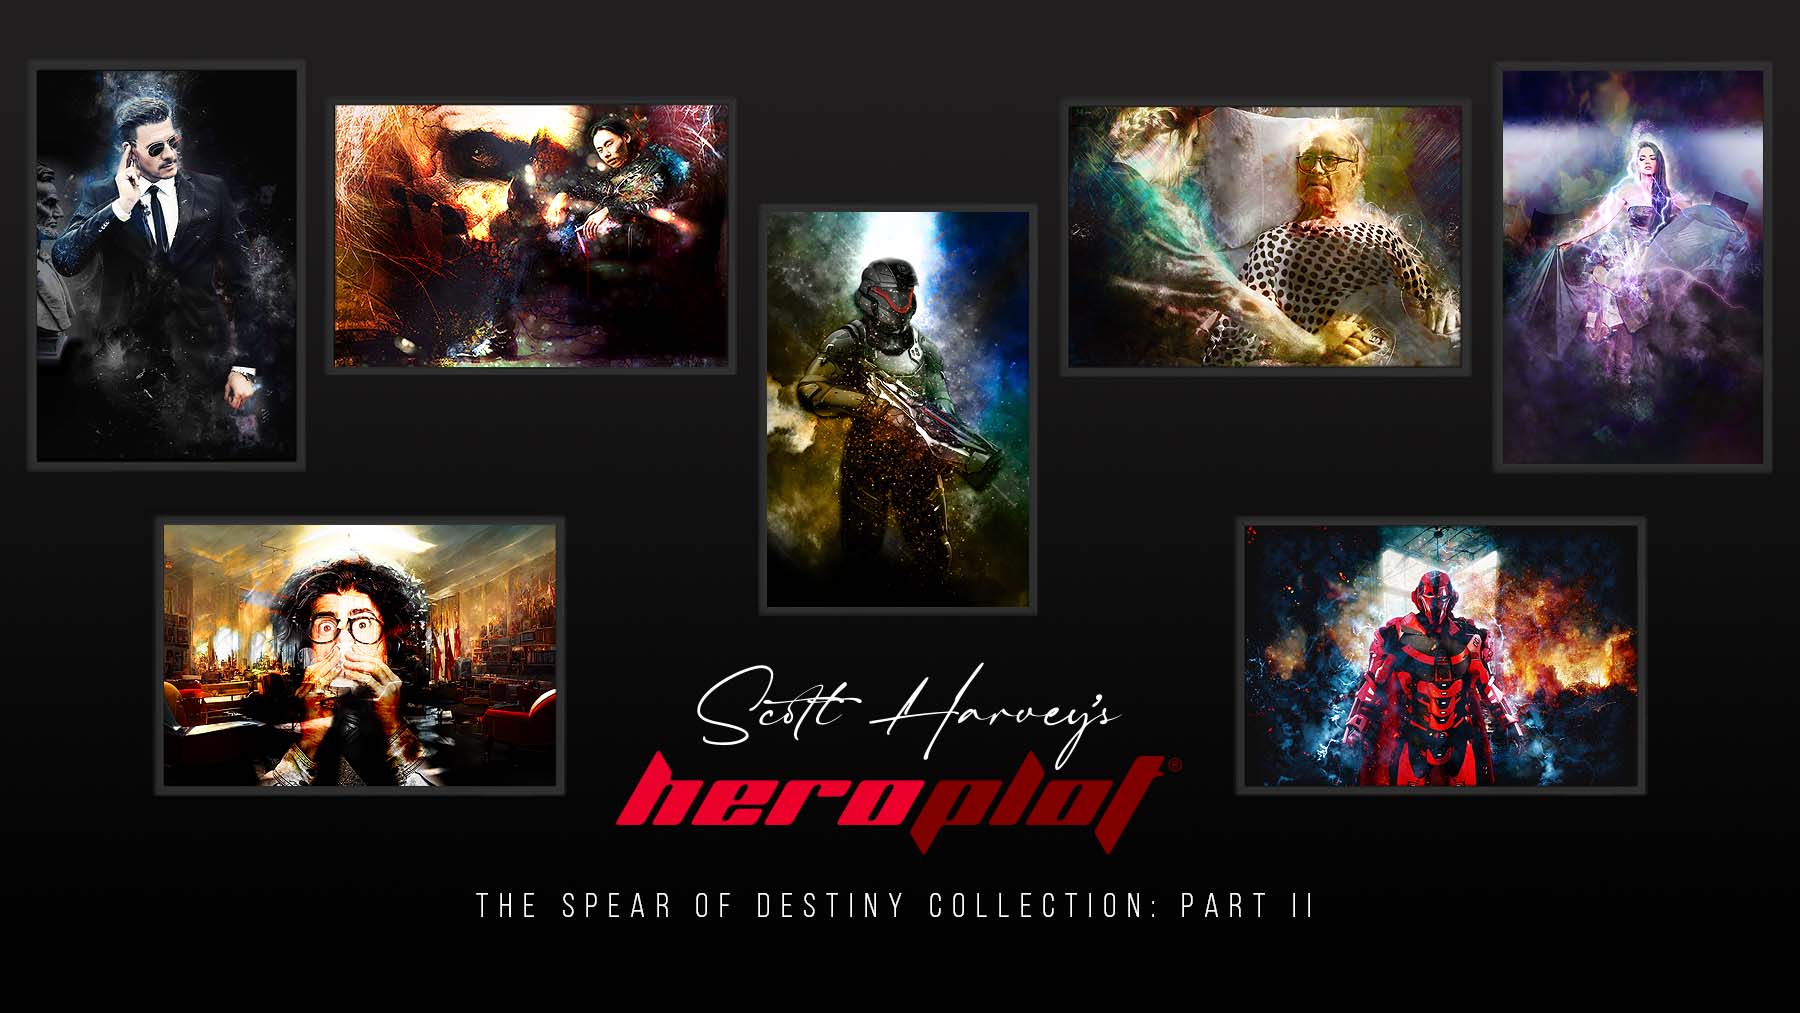 The Spear of Destiny Collection: Part II NFT artwork from HEROPLOT